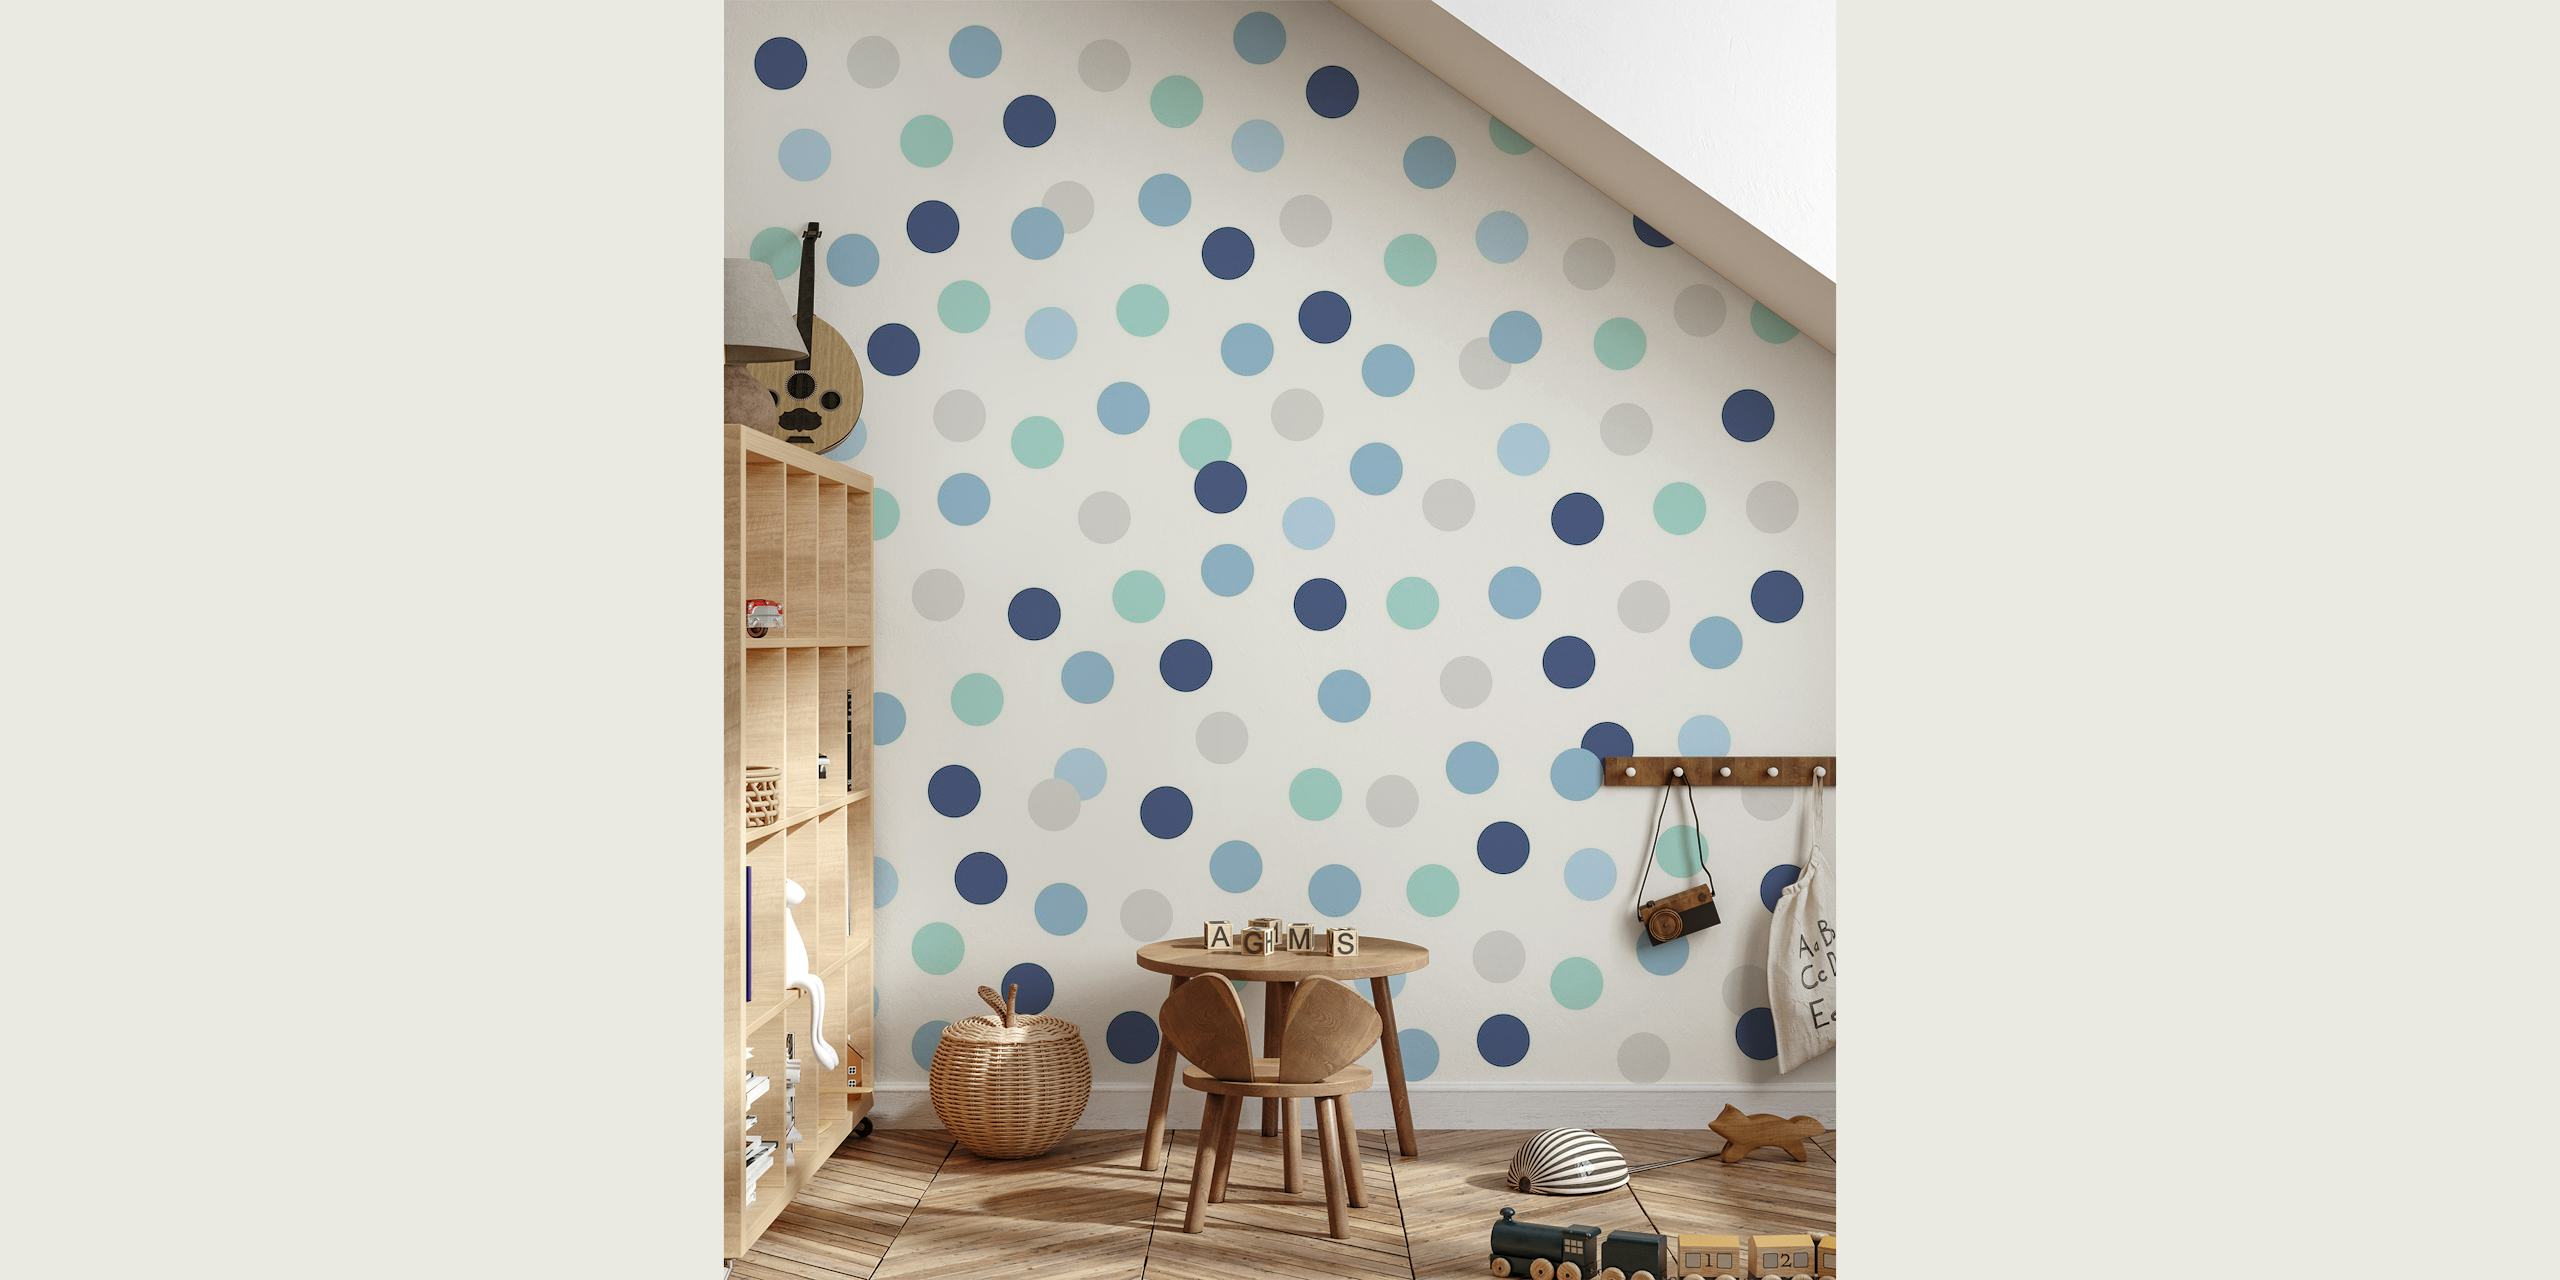 Blue Polkadots wall mural with different shades of blue dots on a white background